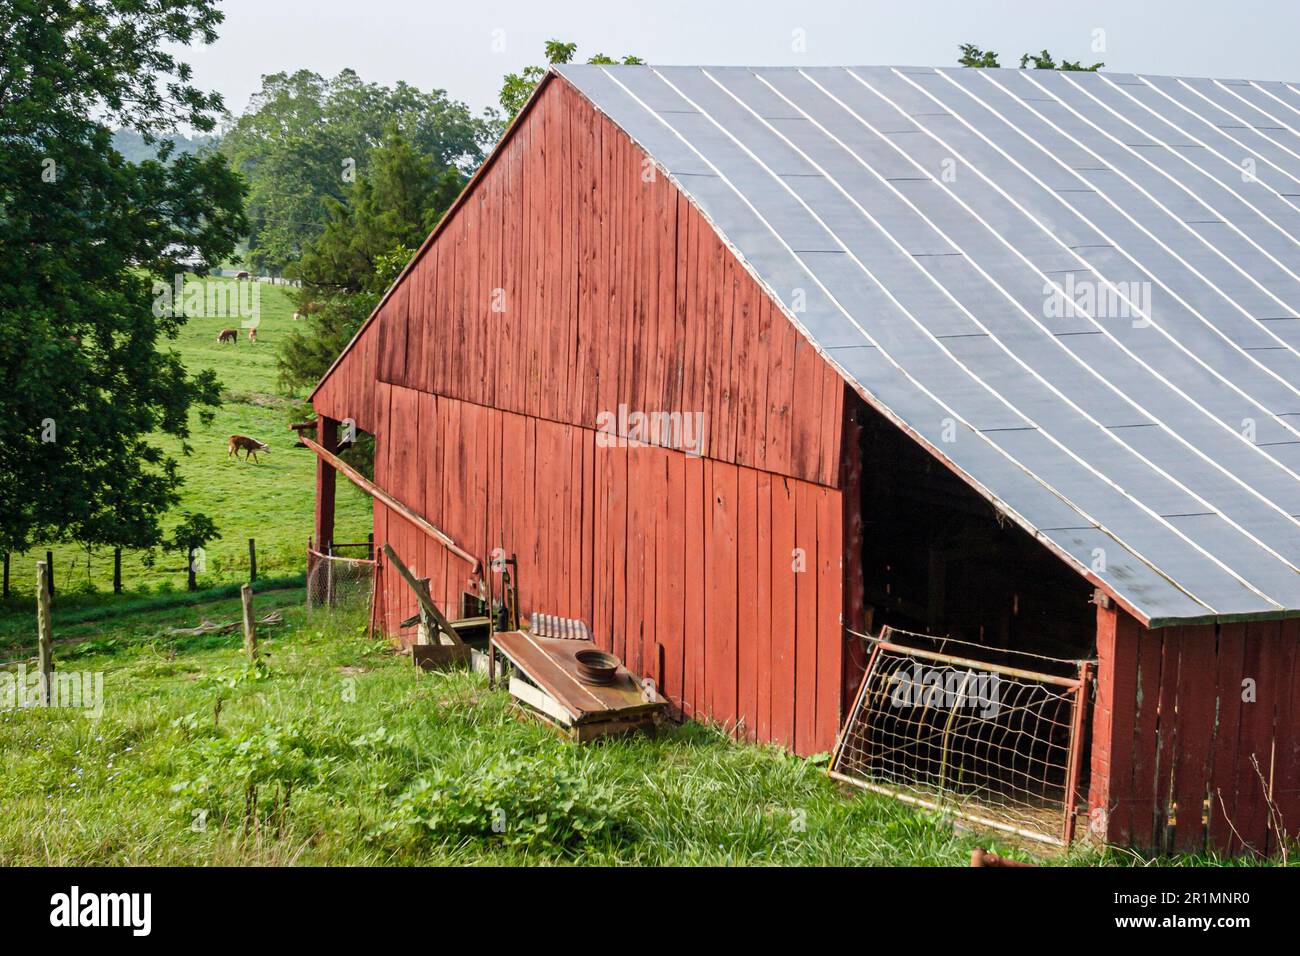 Sevierville Tennessee,red barn rural lifestyle country rustic scene scenery, Stock Photo